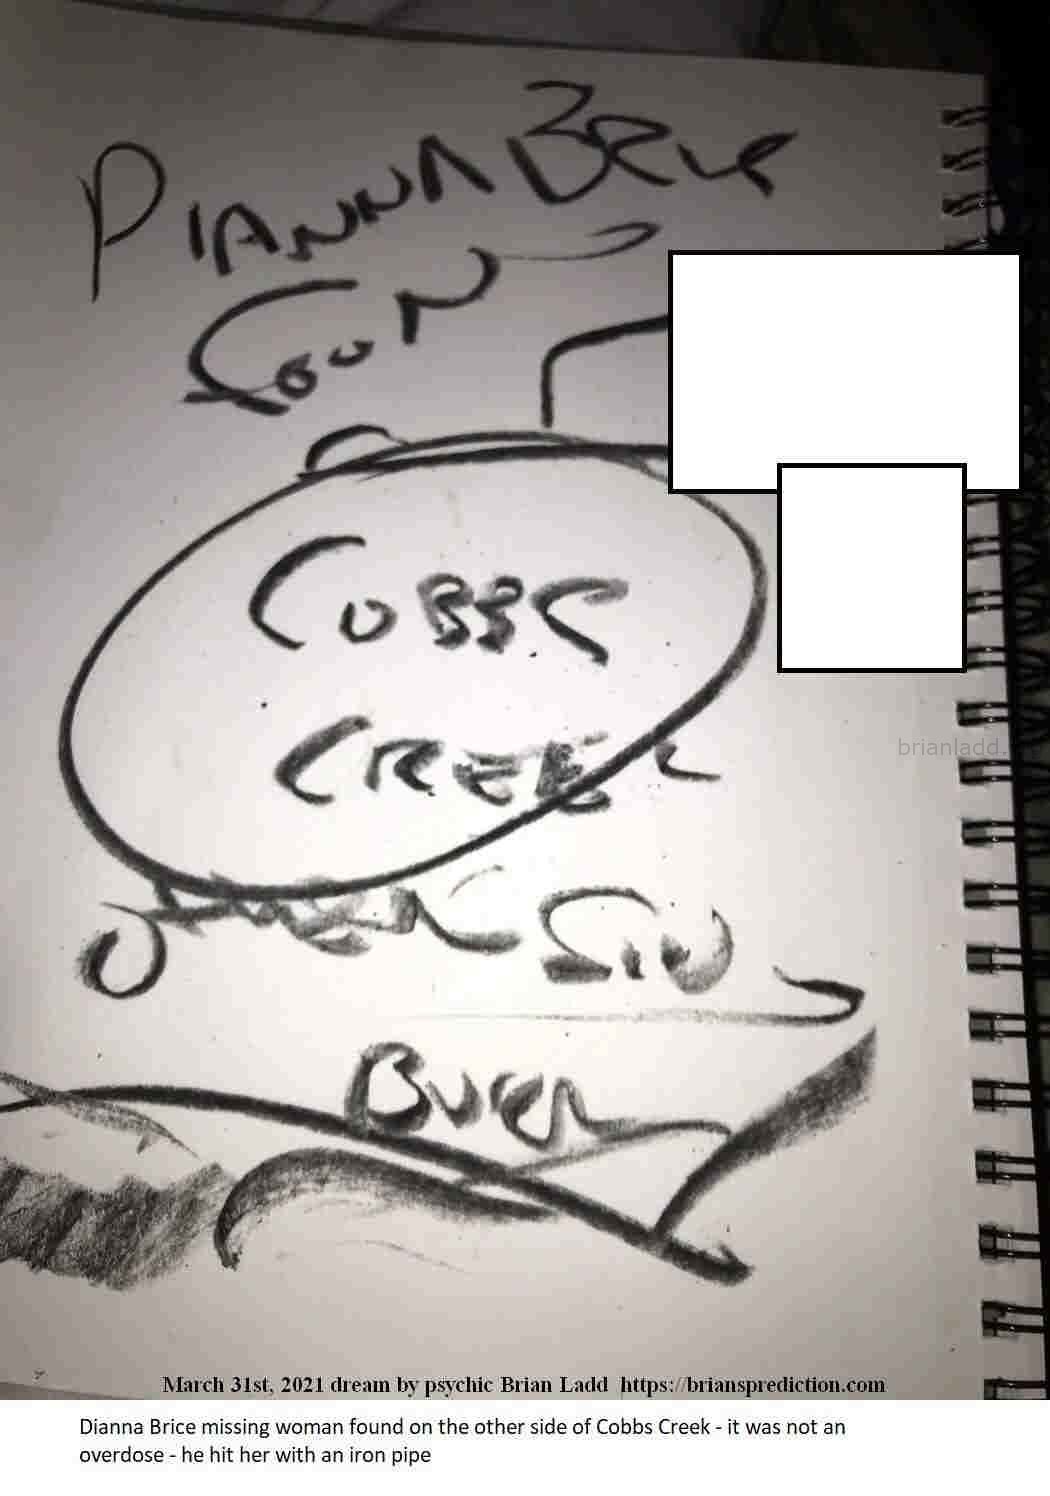 14684 31 March 2021 2 - Dianna Brice Missing Woman Found On The Other Side Of Cobbs Creek - It Was Not An Overdose - He ...
Dianna Brice Missing Woman Found On The Other Side Of Cobbs Creek - It Was Not An Overdose - He Hit Her With An Iron Pipe.  Case At   https://briansprediction.com/Dianna-Brice
